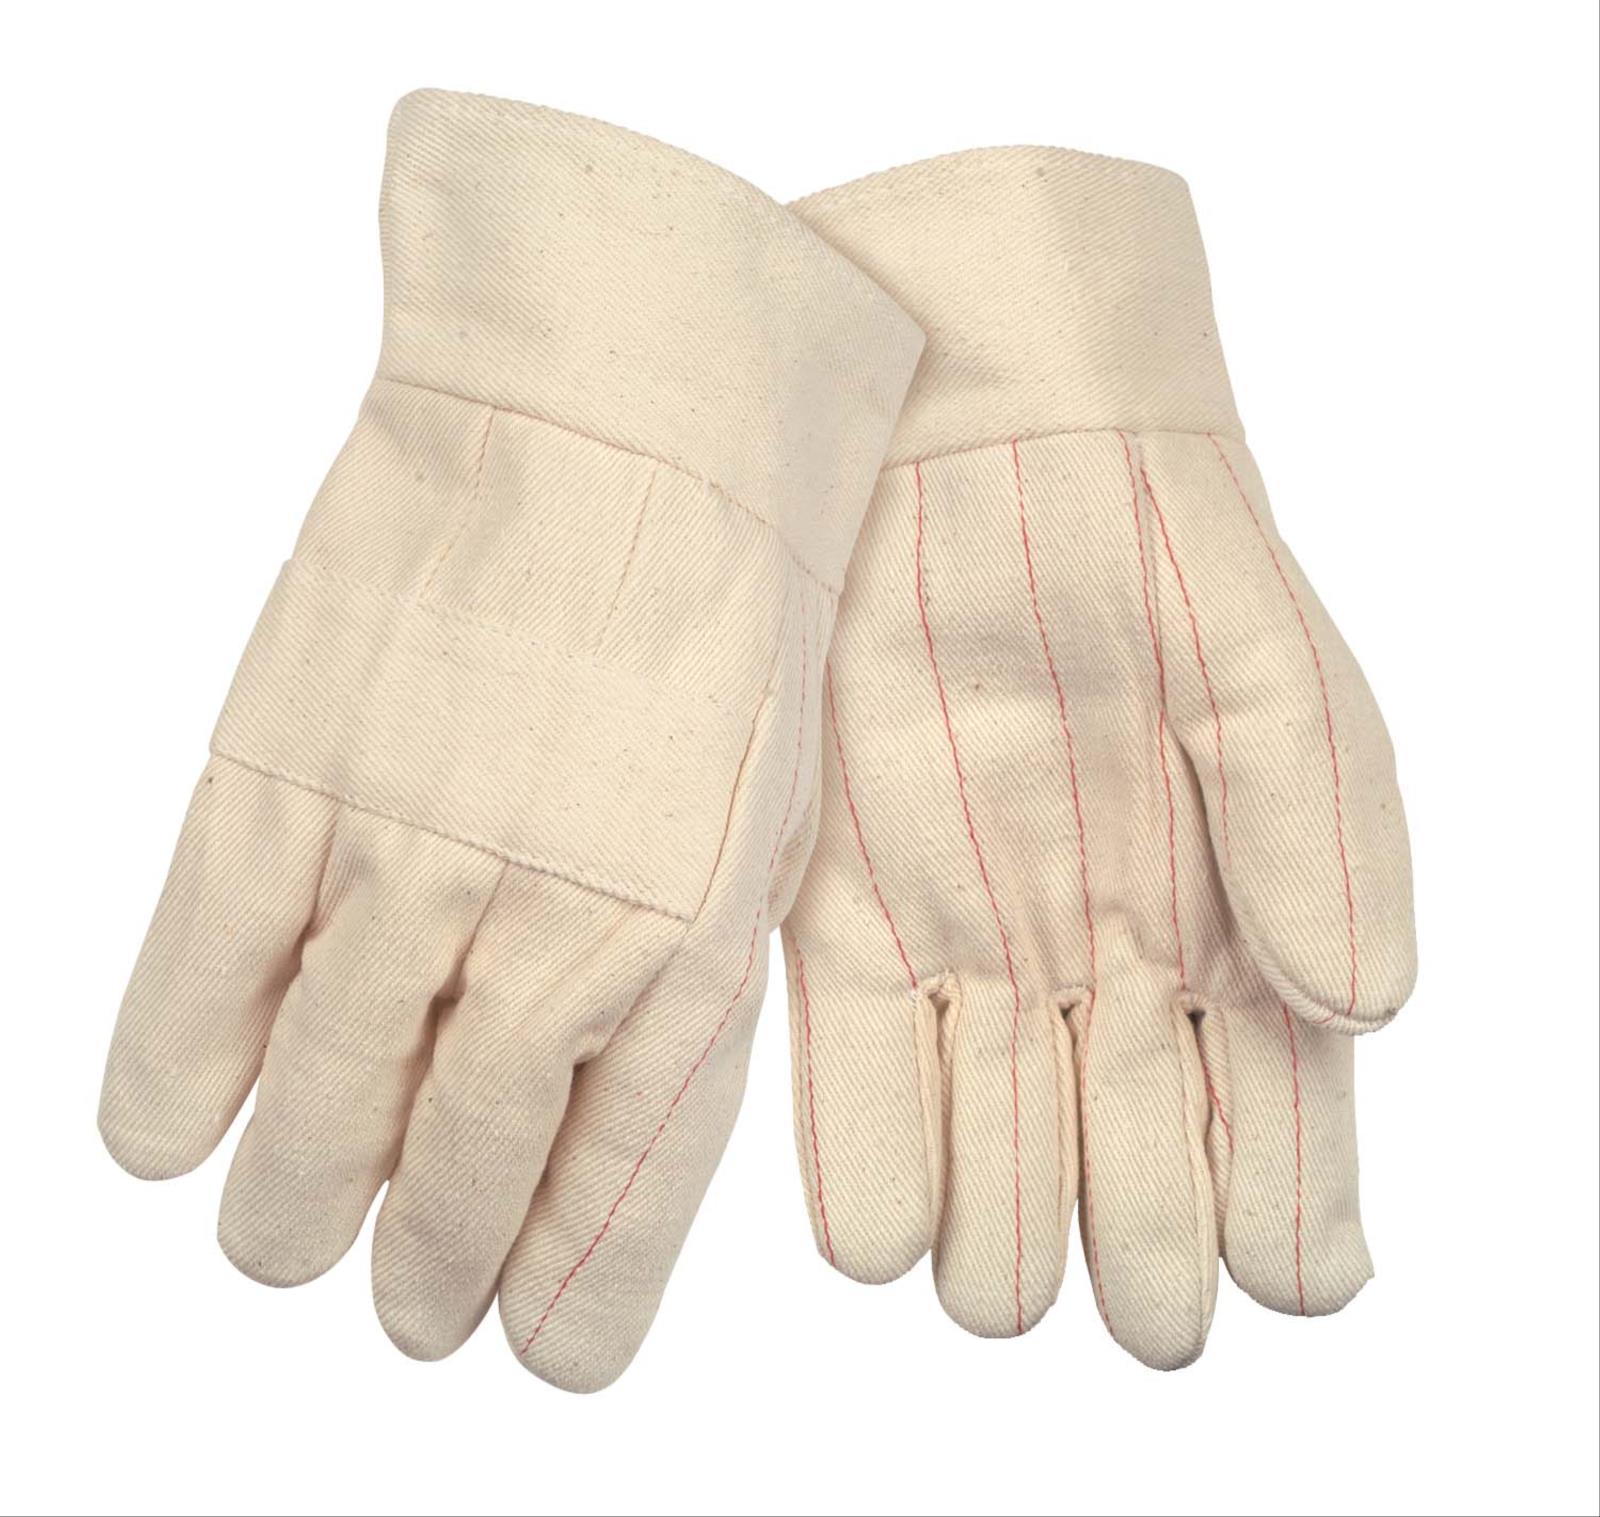 Hot Mill Premium 24 0z Band-Top Nap-In Gloves